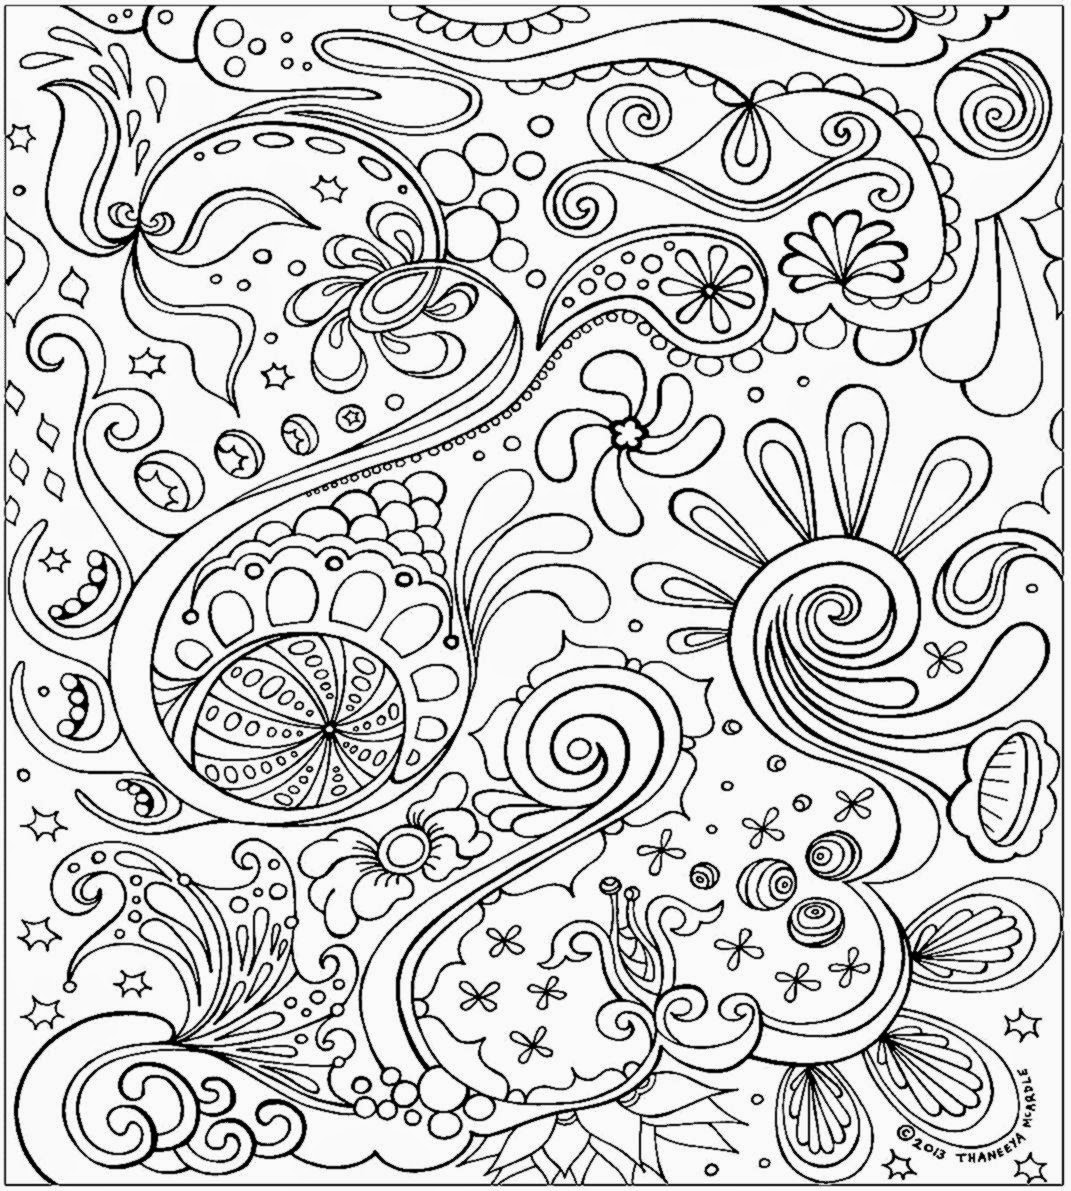 Coloring Sheets For Adults Free Coloring Sheet Coloring Wallpapers Download Free Images Wallpaper [coloring654.blogspot.com]